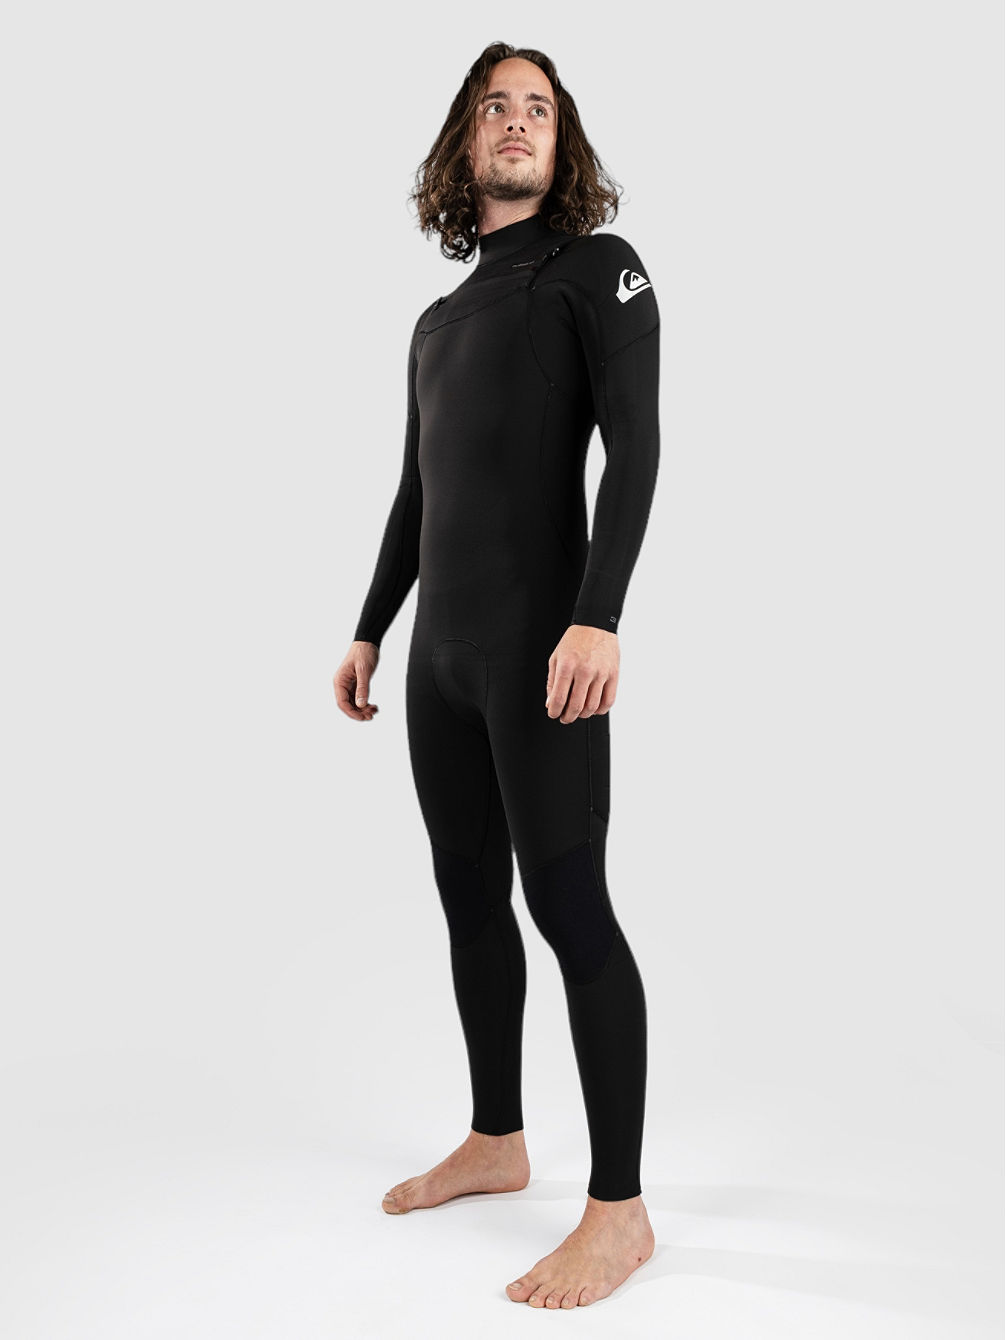 Everyday Sessions 3/2 Cz Wetsuit